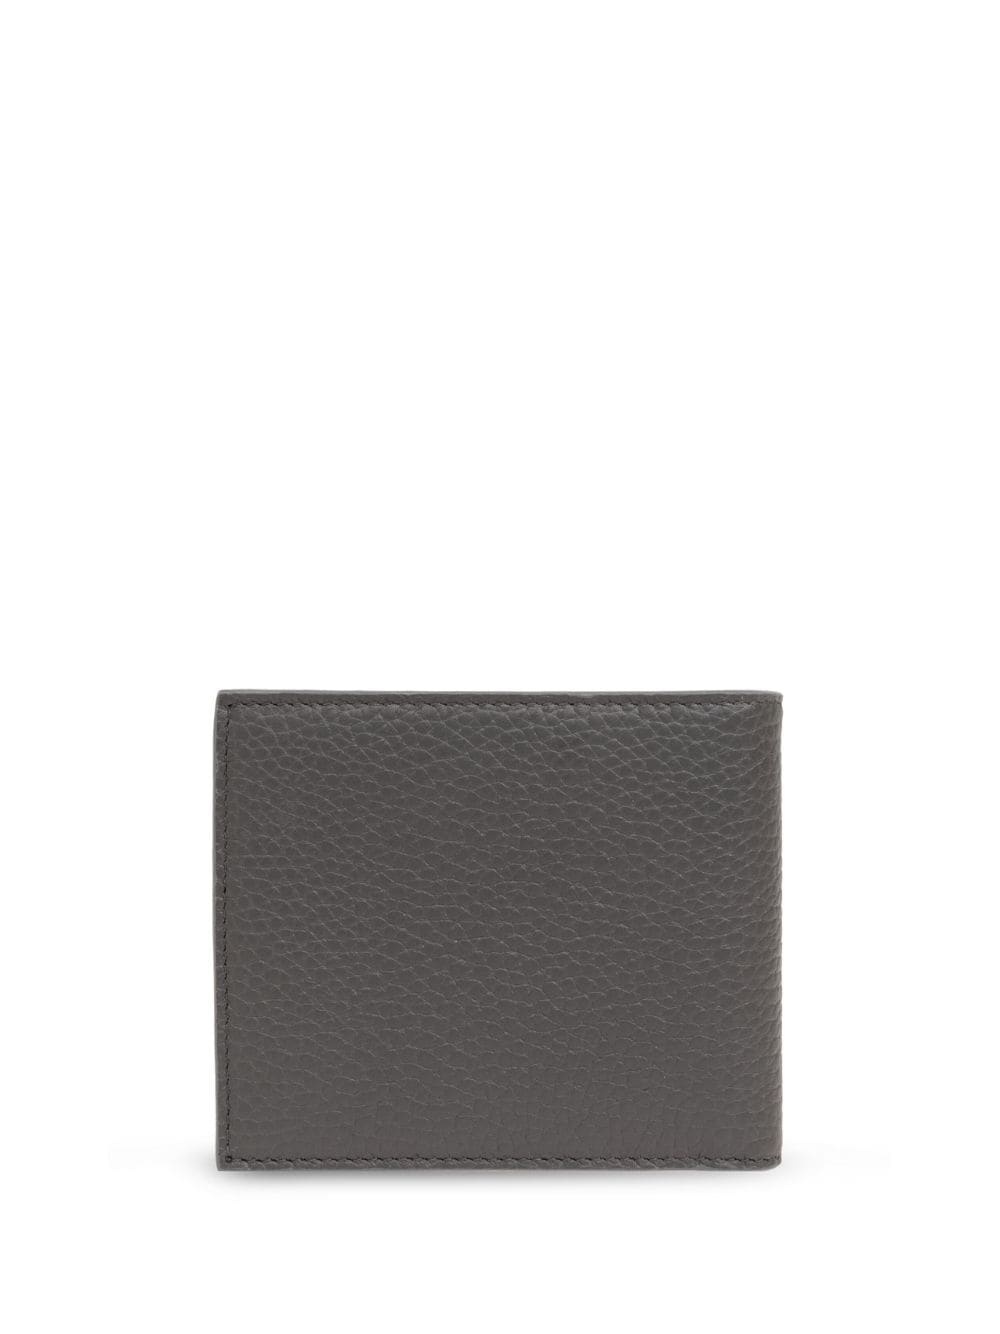 logo-embossed leather wallet - 2